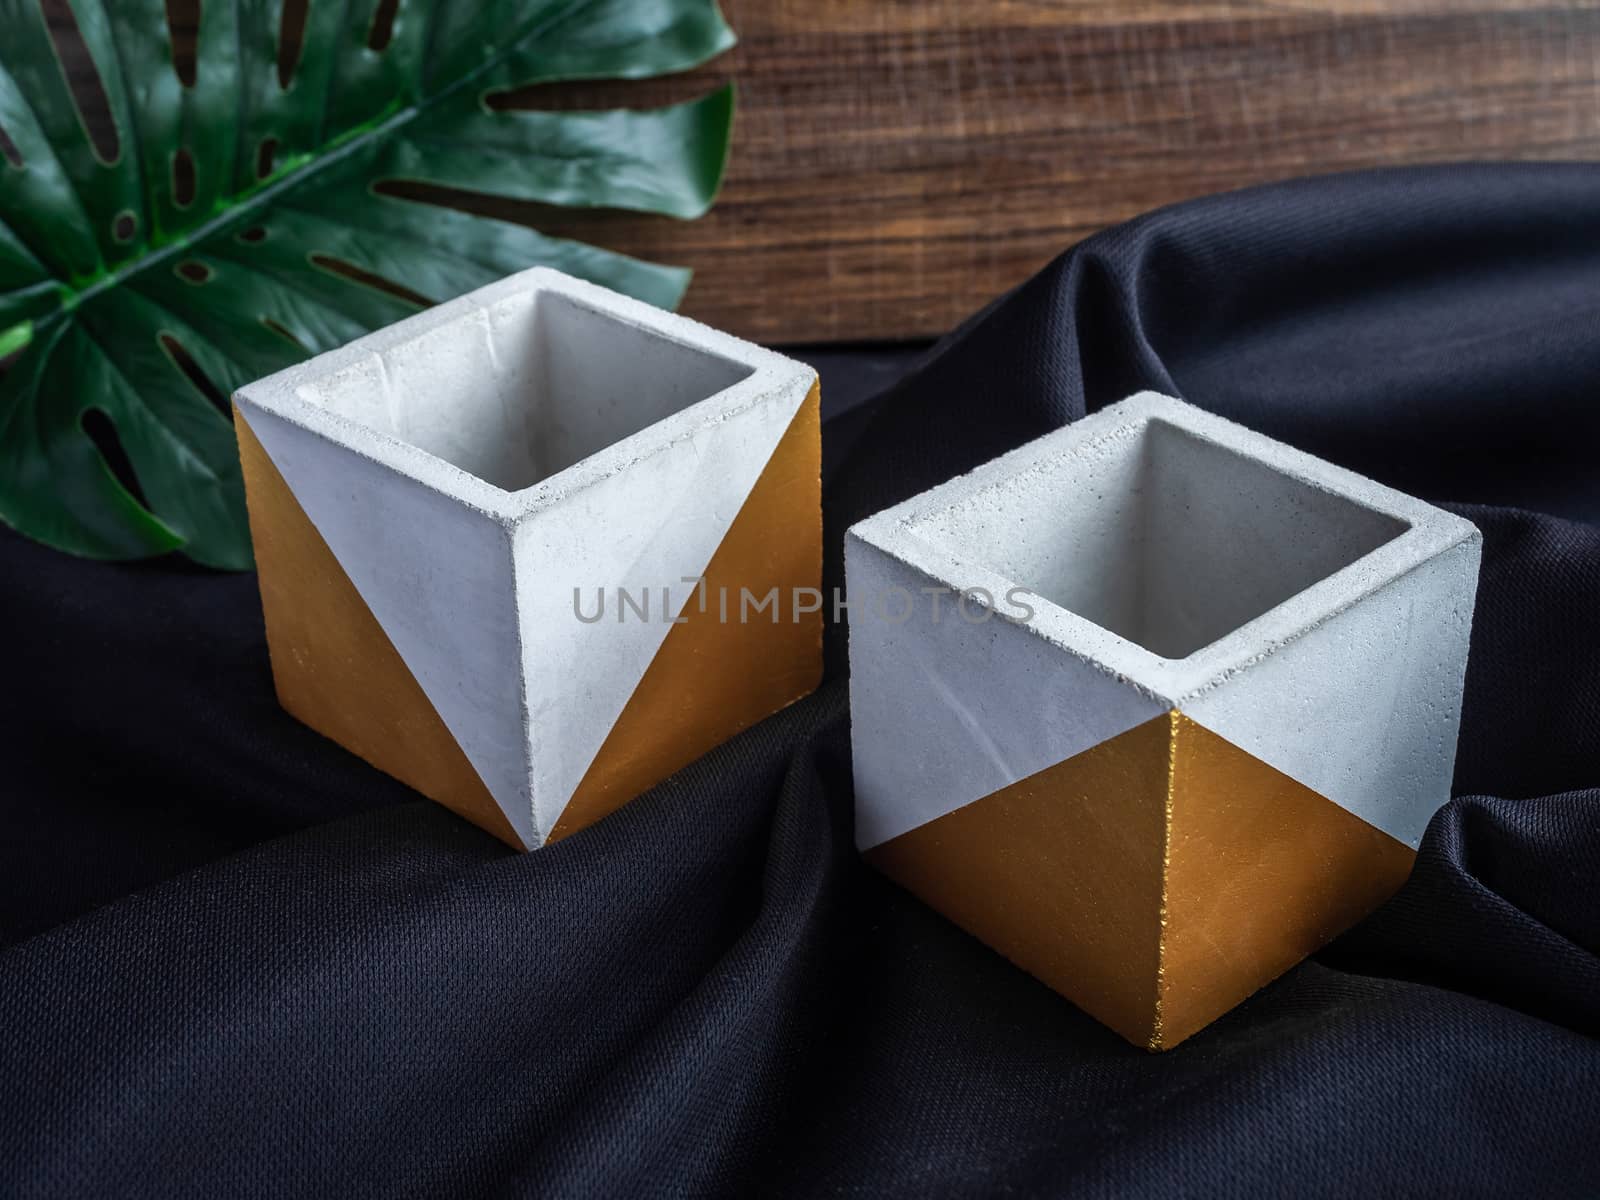 Cactus pot. Concrete pot. Two empty modern geometric concrete planters with gold painted and green leaf on black fabric and wooden background.